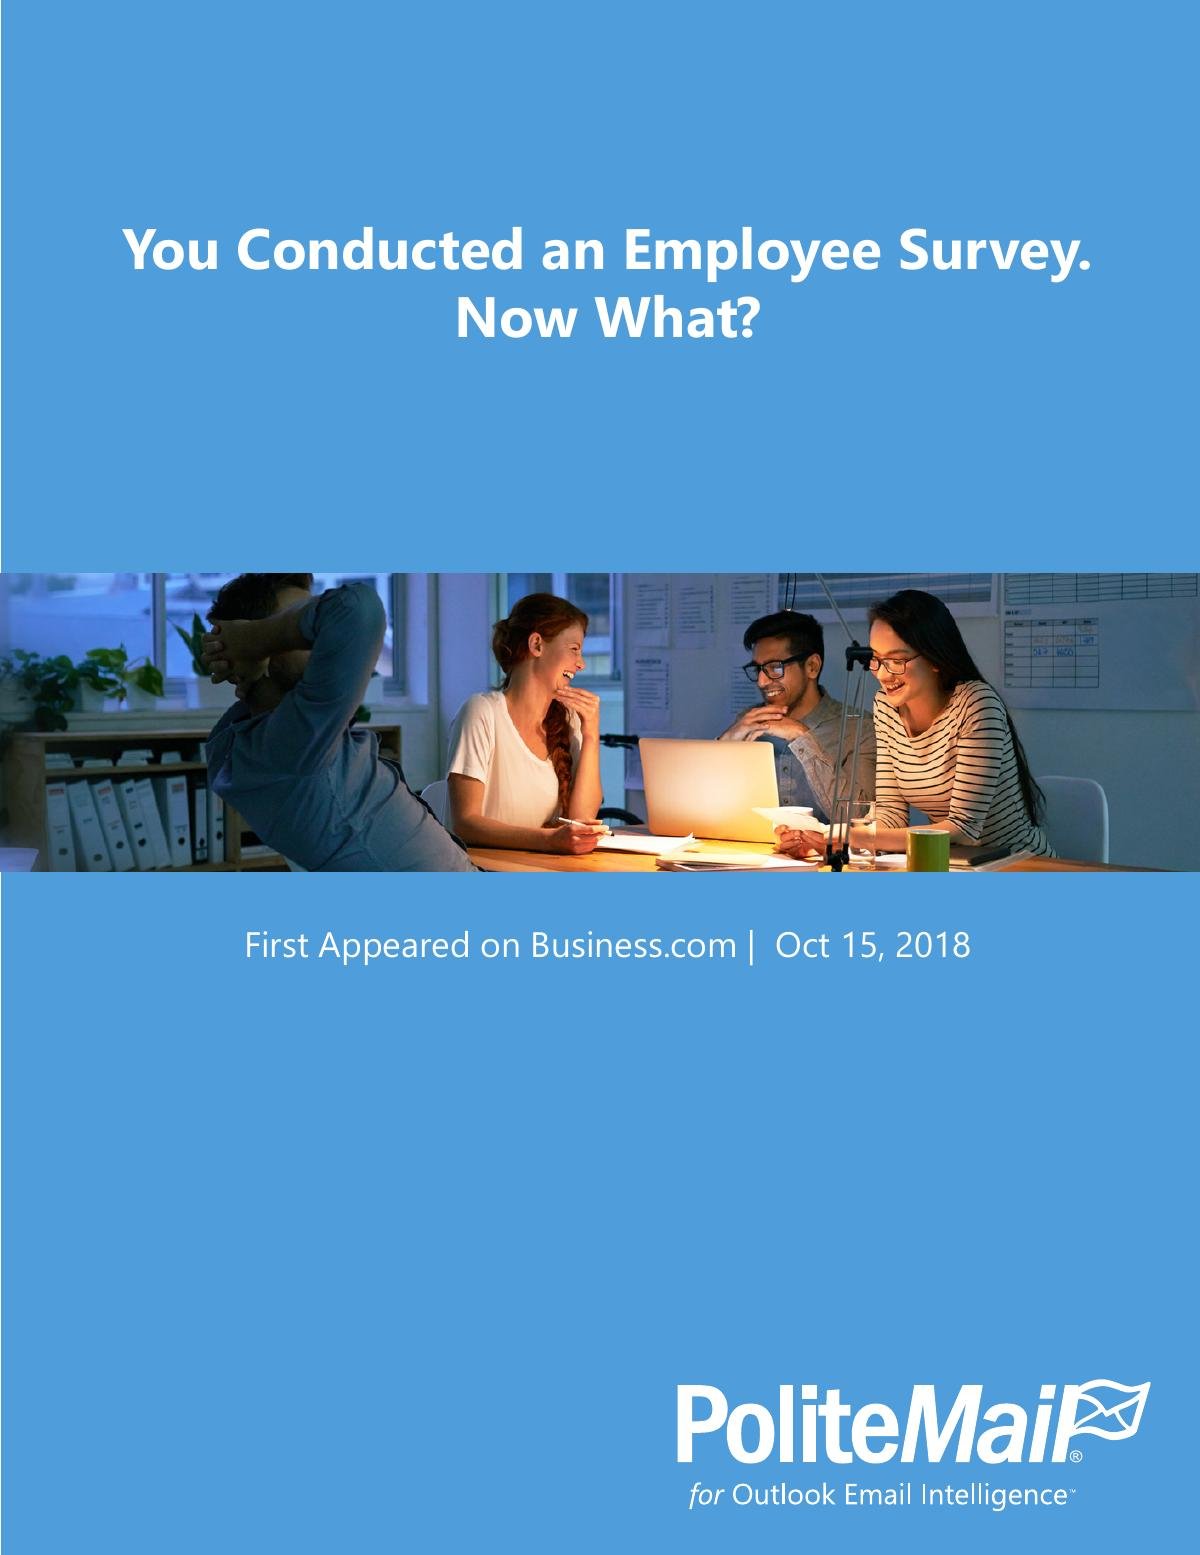 You Conducted an Employee Survey. Now What?